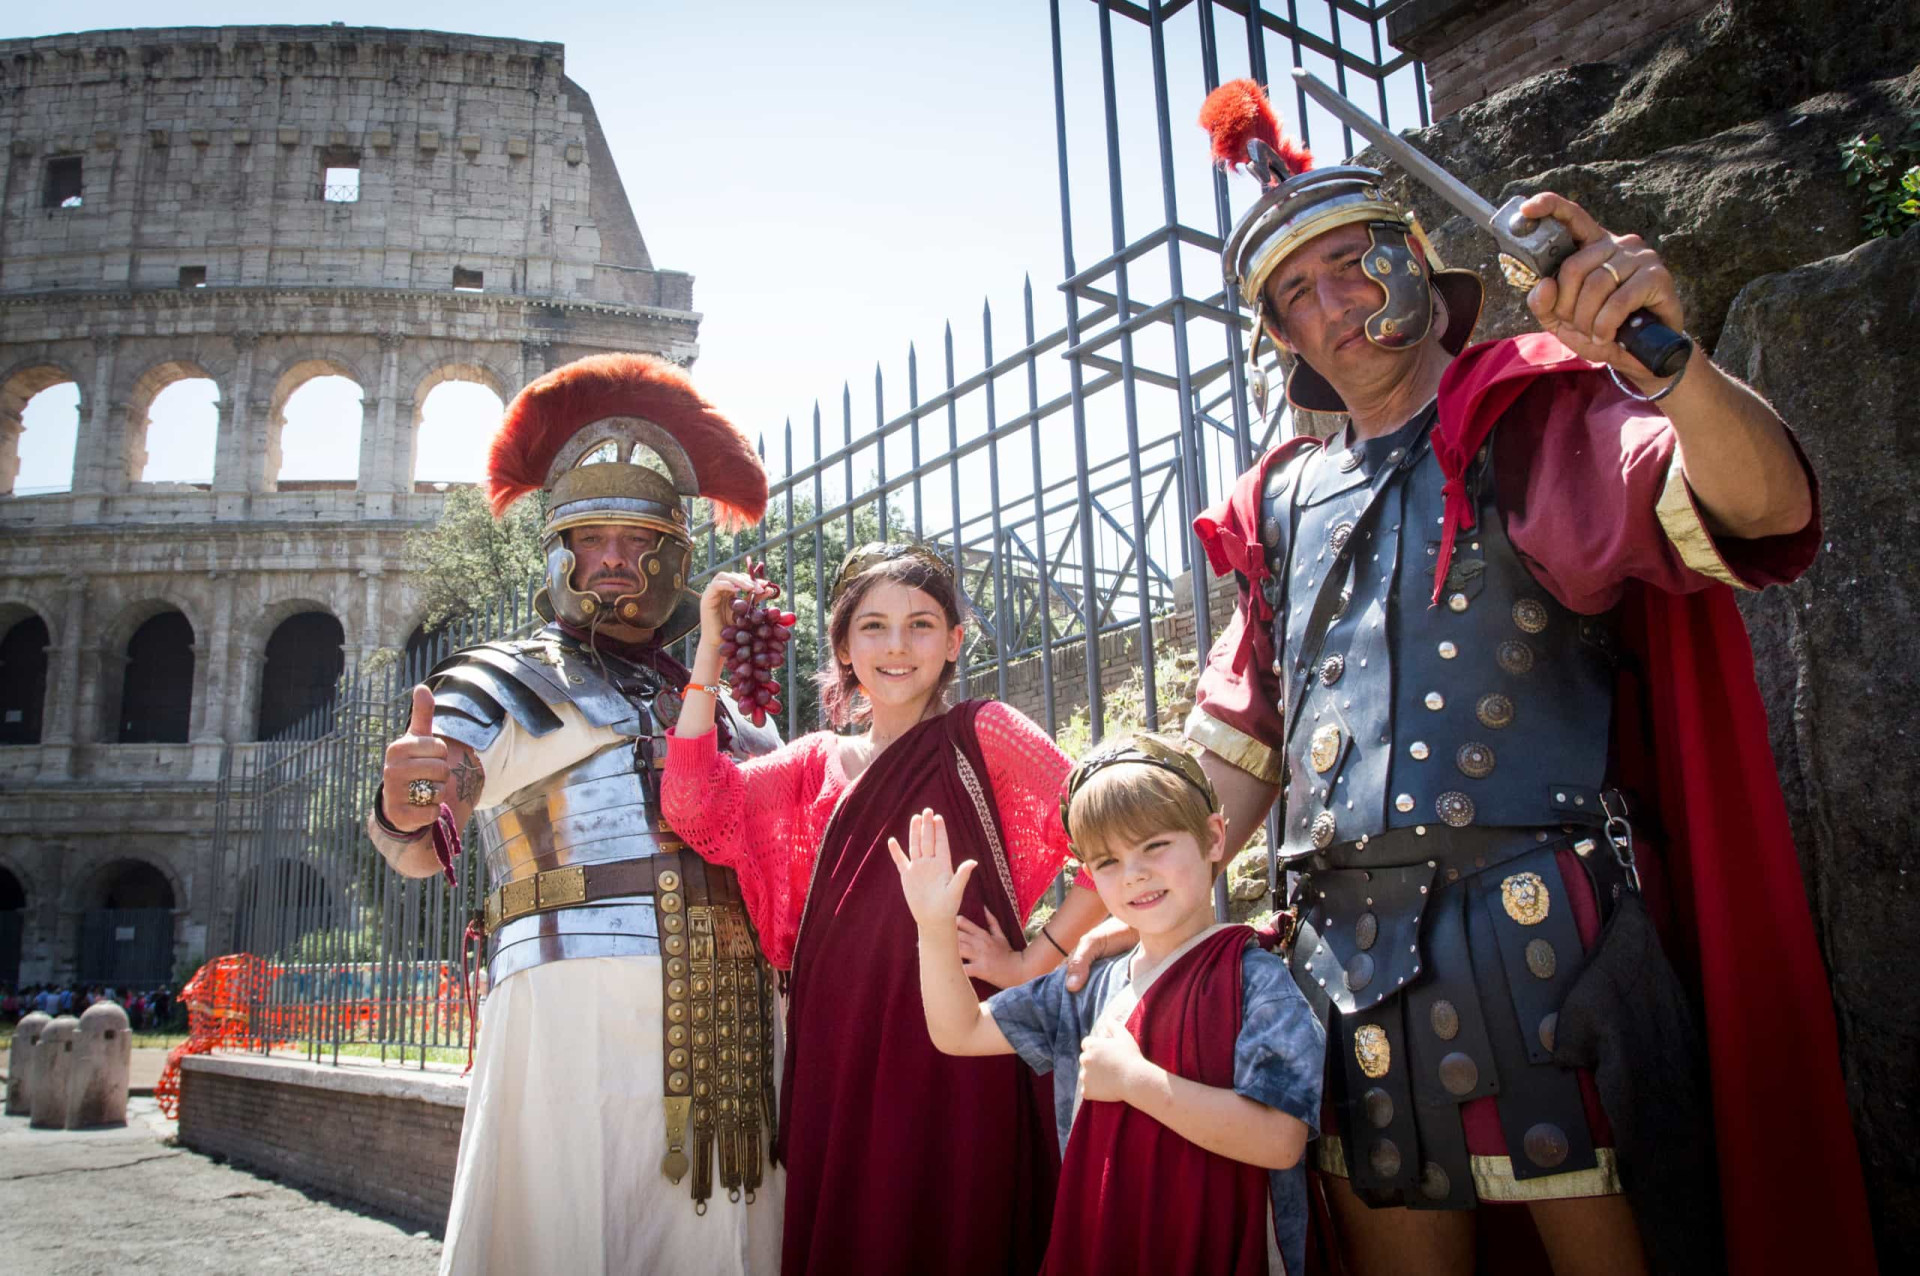 <p>Kids of toddler-age and above will love the opportunity to step right into Rome's fascinating history at the Coliseum and see the home of the pope at Vatican City, plus the abundant ice cream is a delicious way for the whole family to cool down after a hot day's sightseeing.  </p><p>You may also like:<a href="https://www.starsinsider.com/n/334439?utm_source=msn.com&utm_medium=display&utm_campaign=referral_description&utm_content=481299v1en-en"> Lupus: understand the mysterious disease affecting several celebrities</a></p>